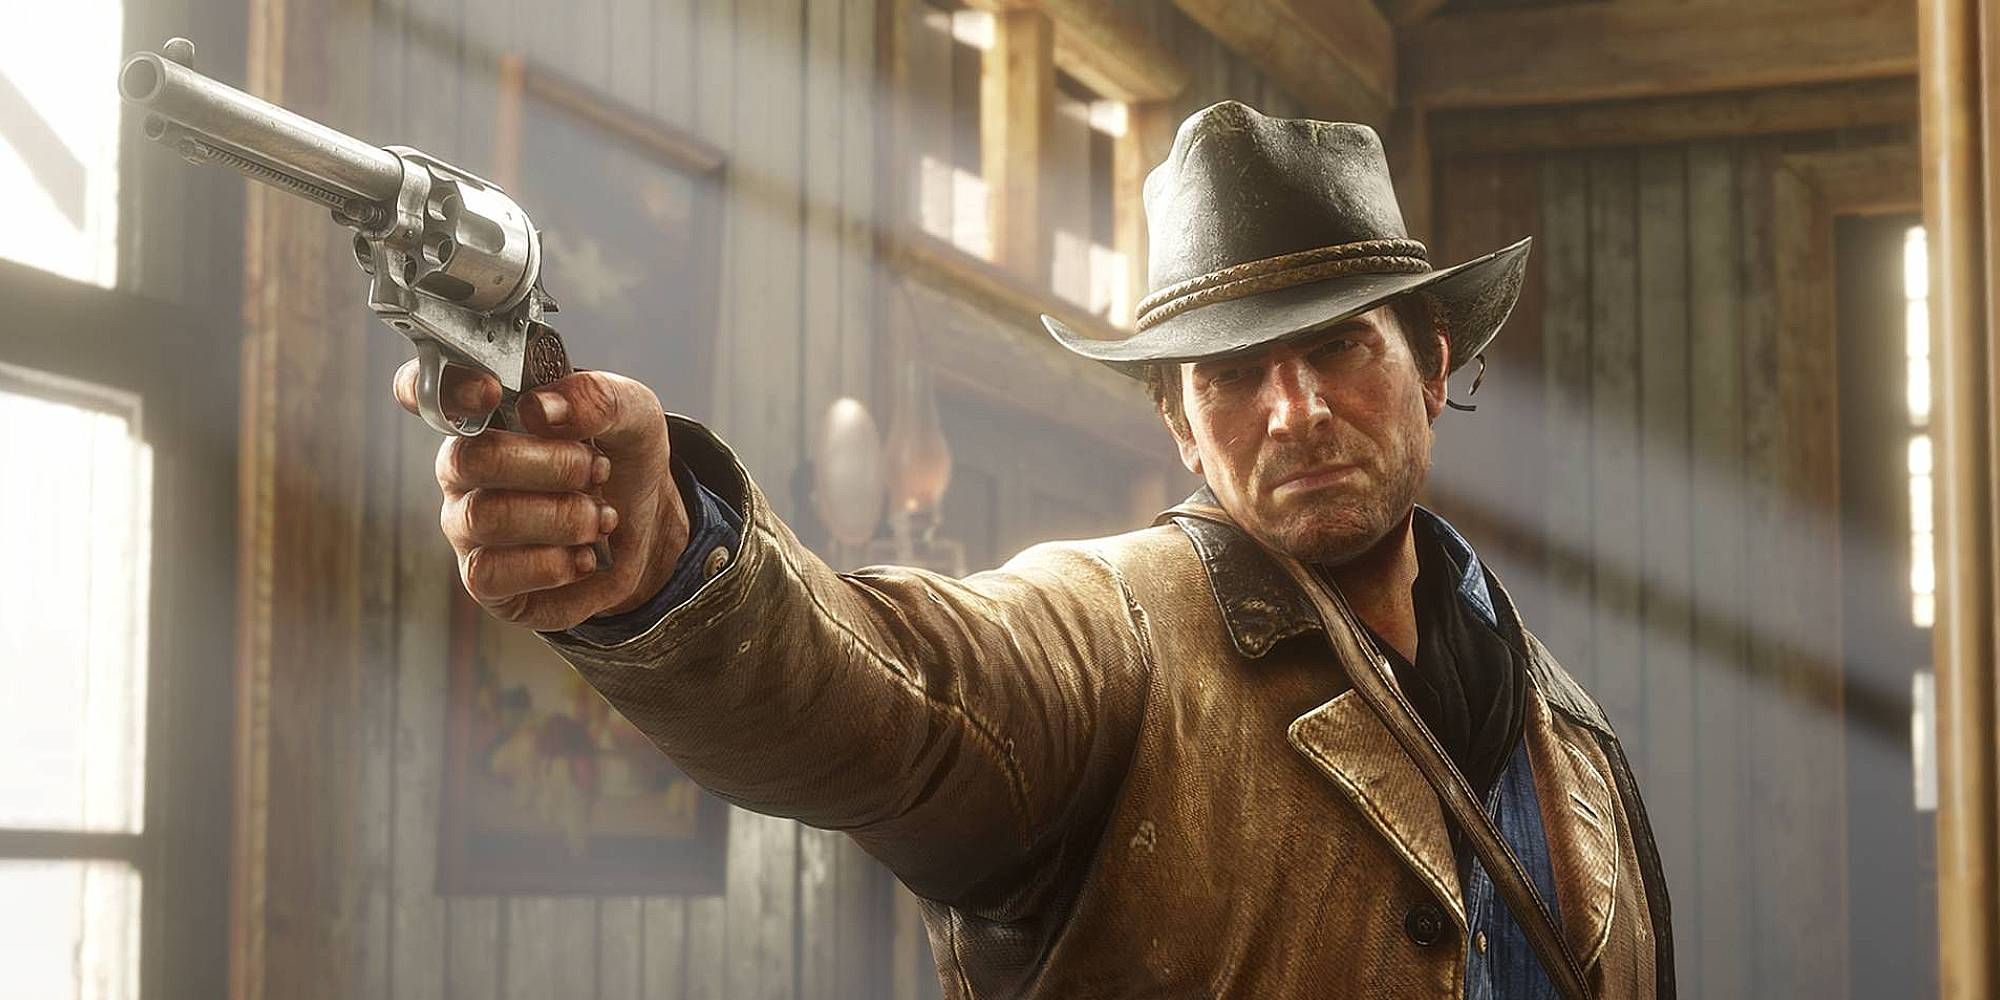 Arthur Morgan looks ahead as he takes aim with his revolver in the sunny interior